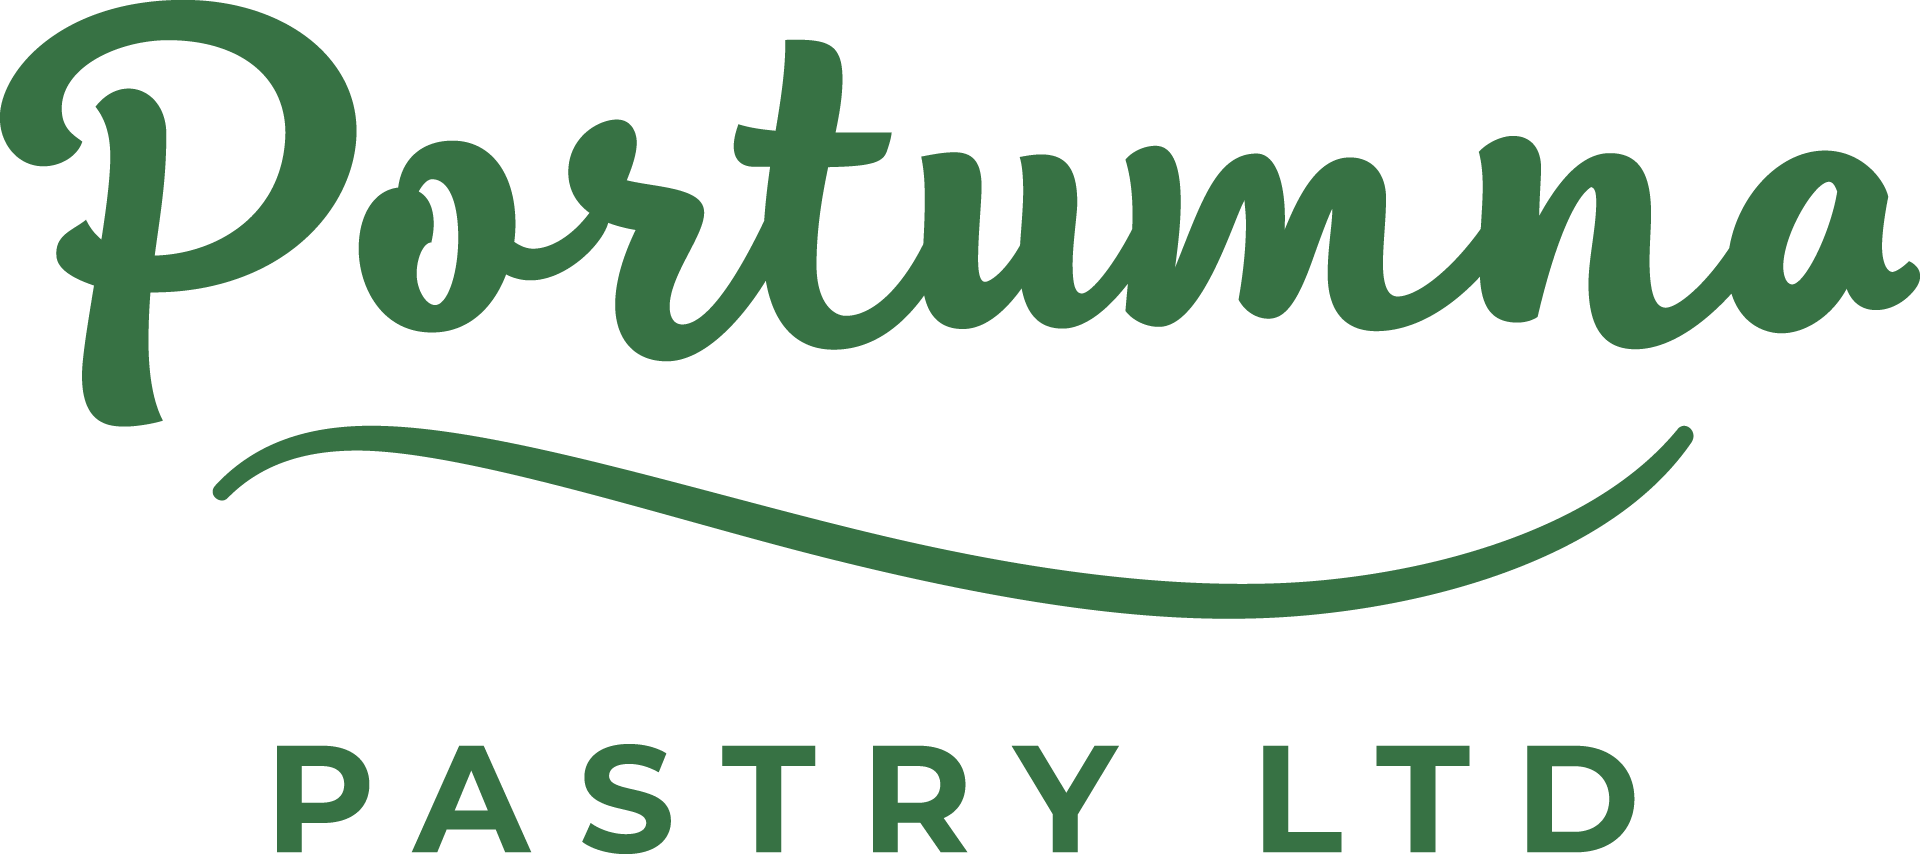 Portumna Pastry Limited logotype